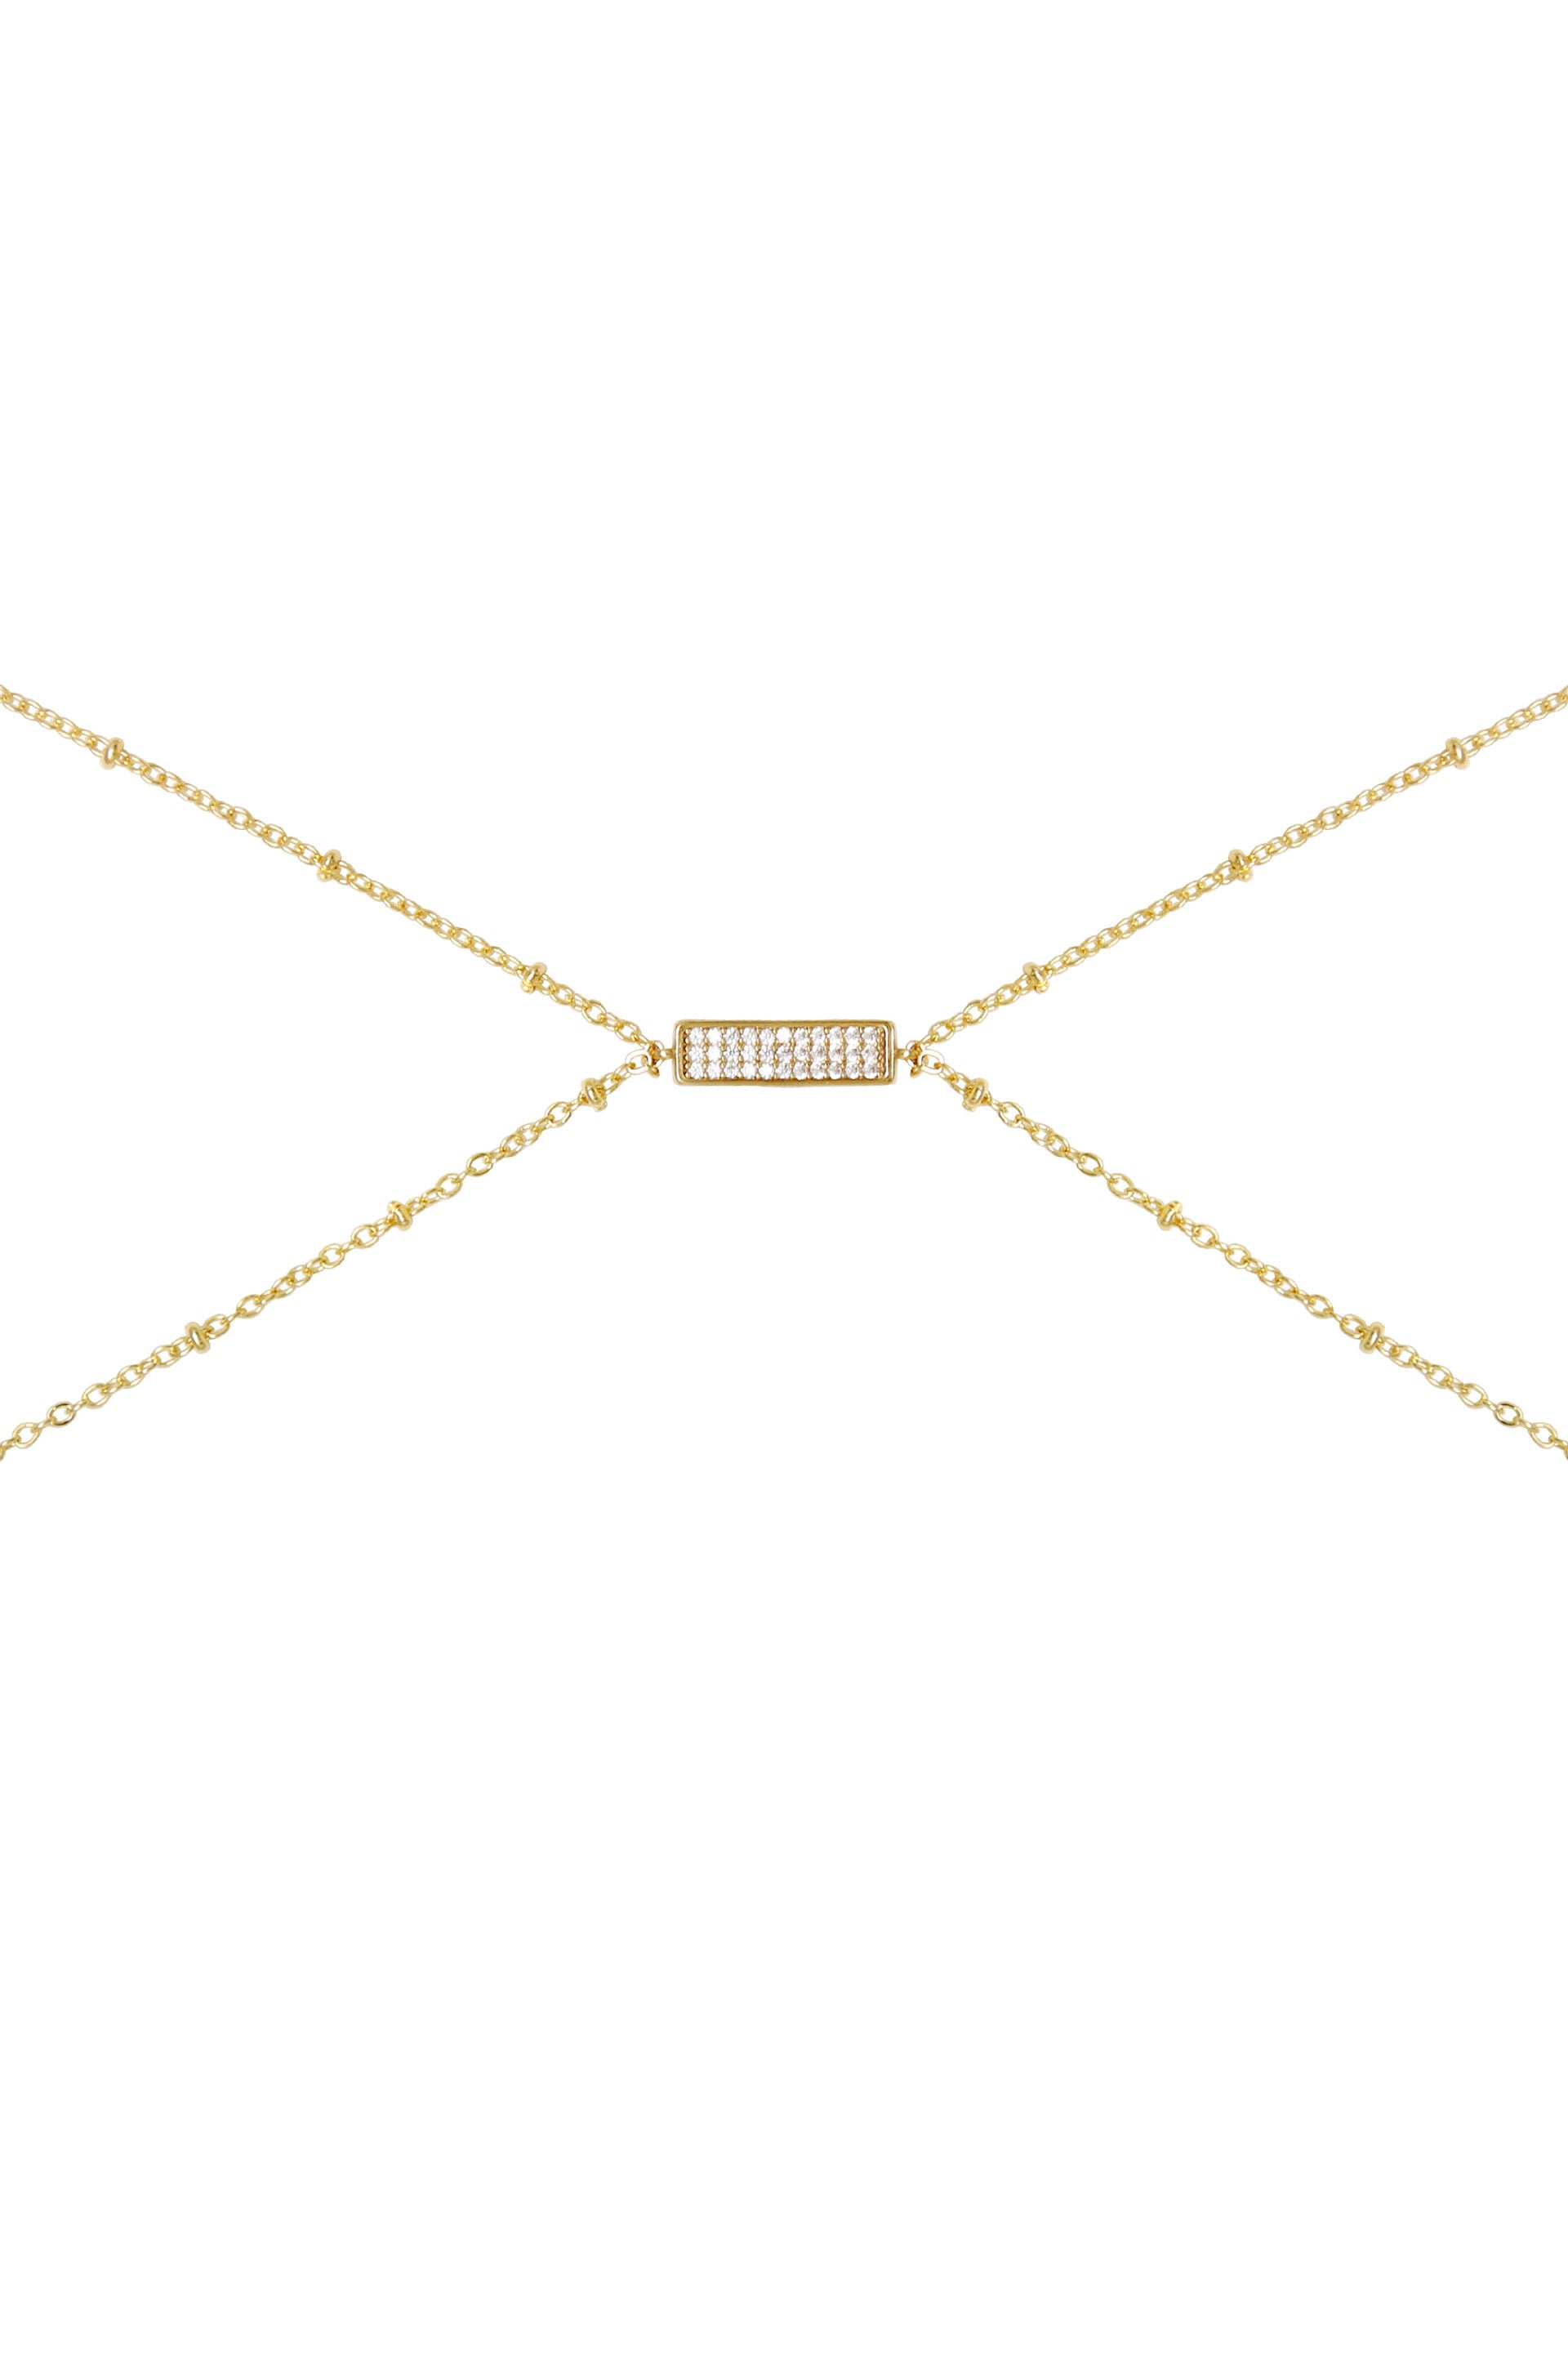 Sun Searcher Body Chain in Gold on white background  